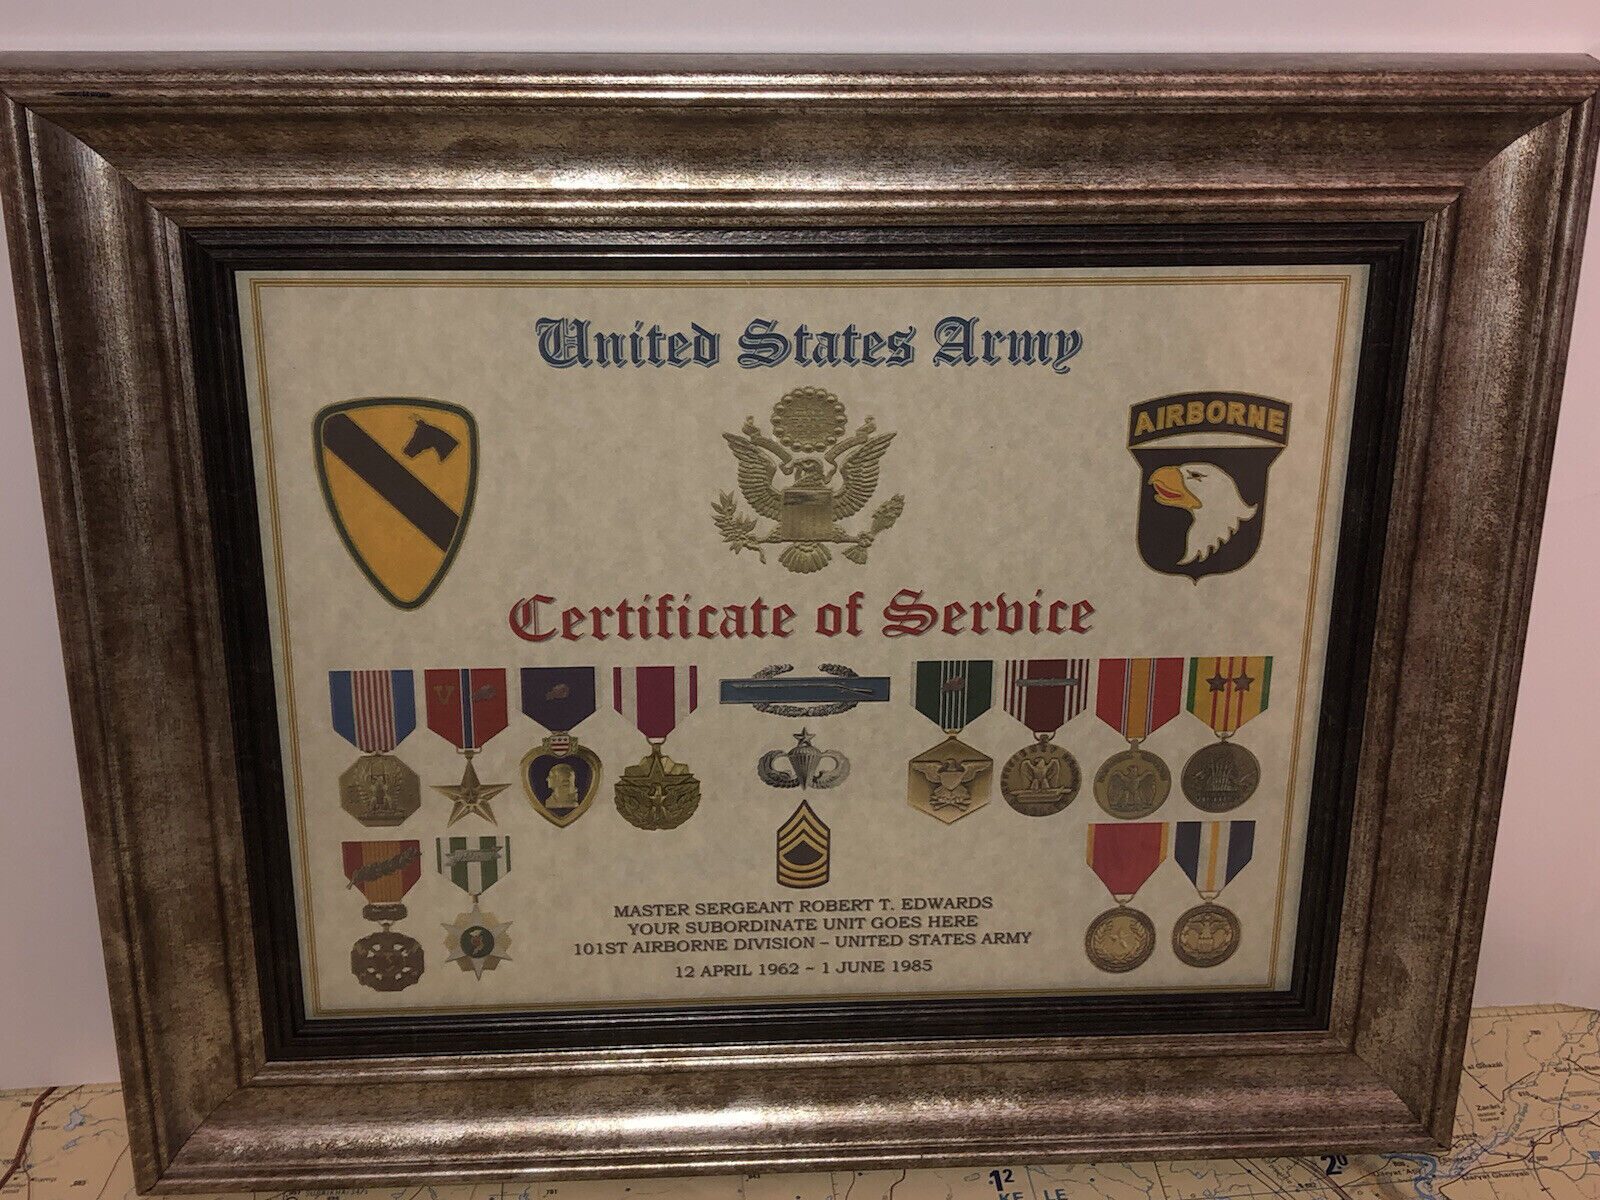 U.S. ARMY CERTIFICATE OF SERVICE / SHADOW BOX PRINT / W-MEDALS 